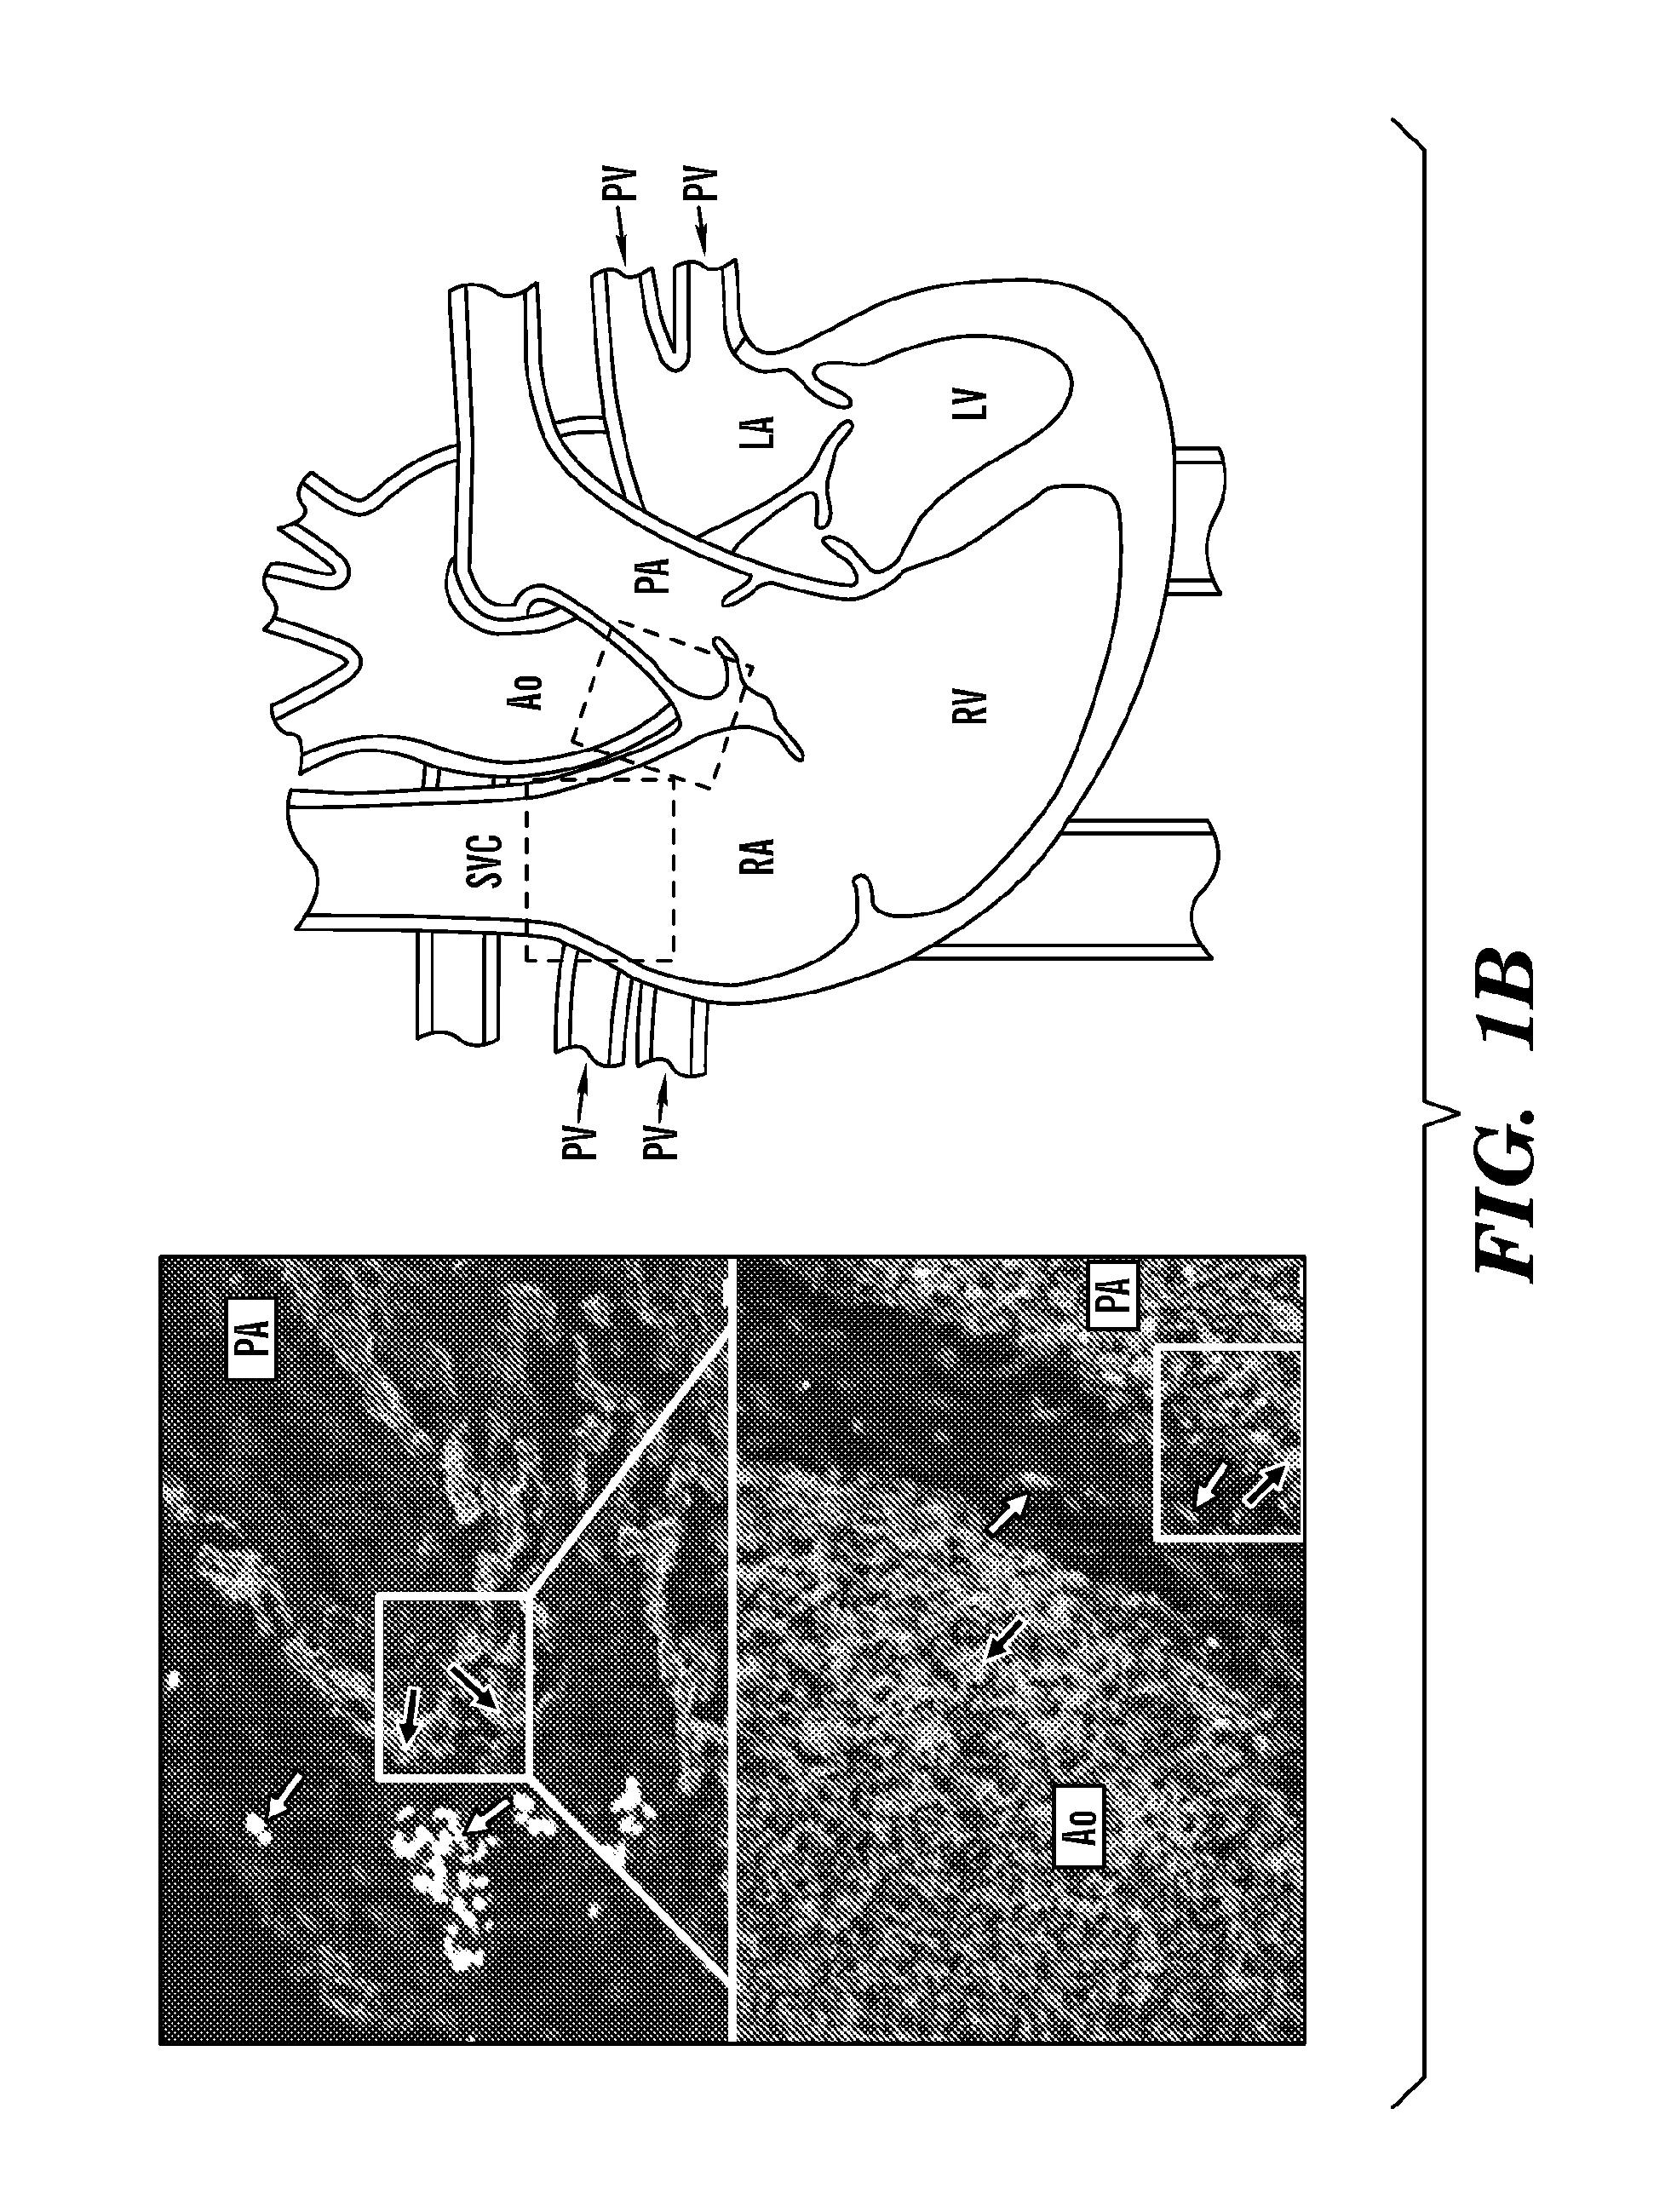 Generation of vascularized human heart tissue and uses thereof